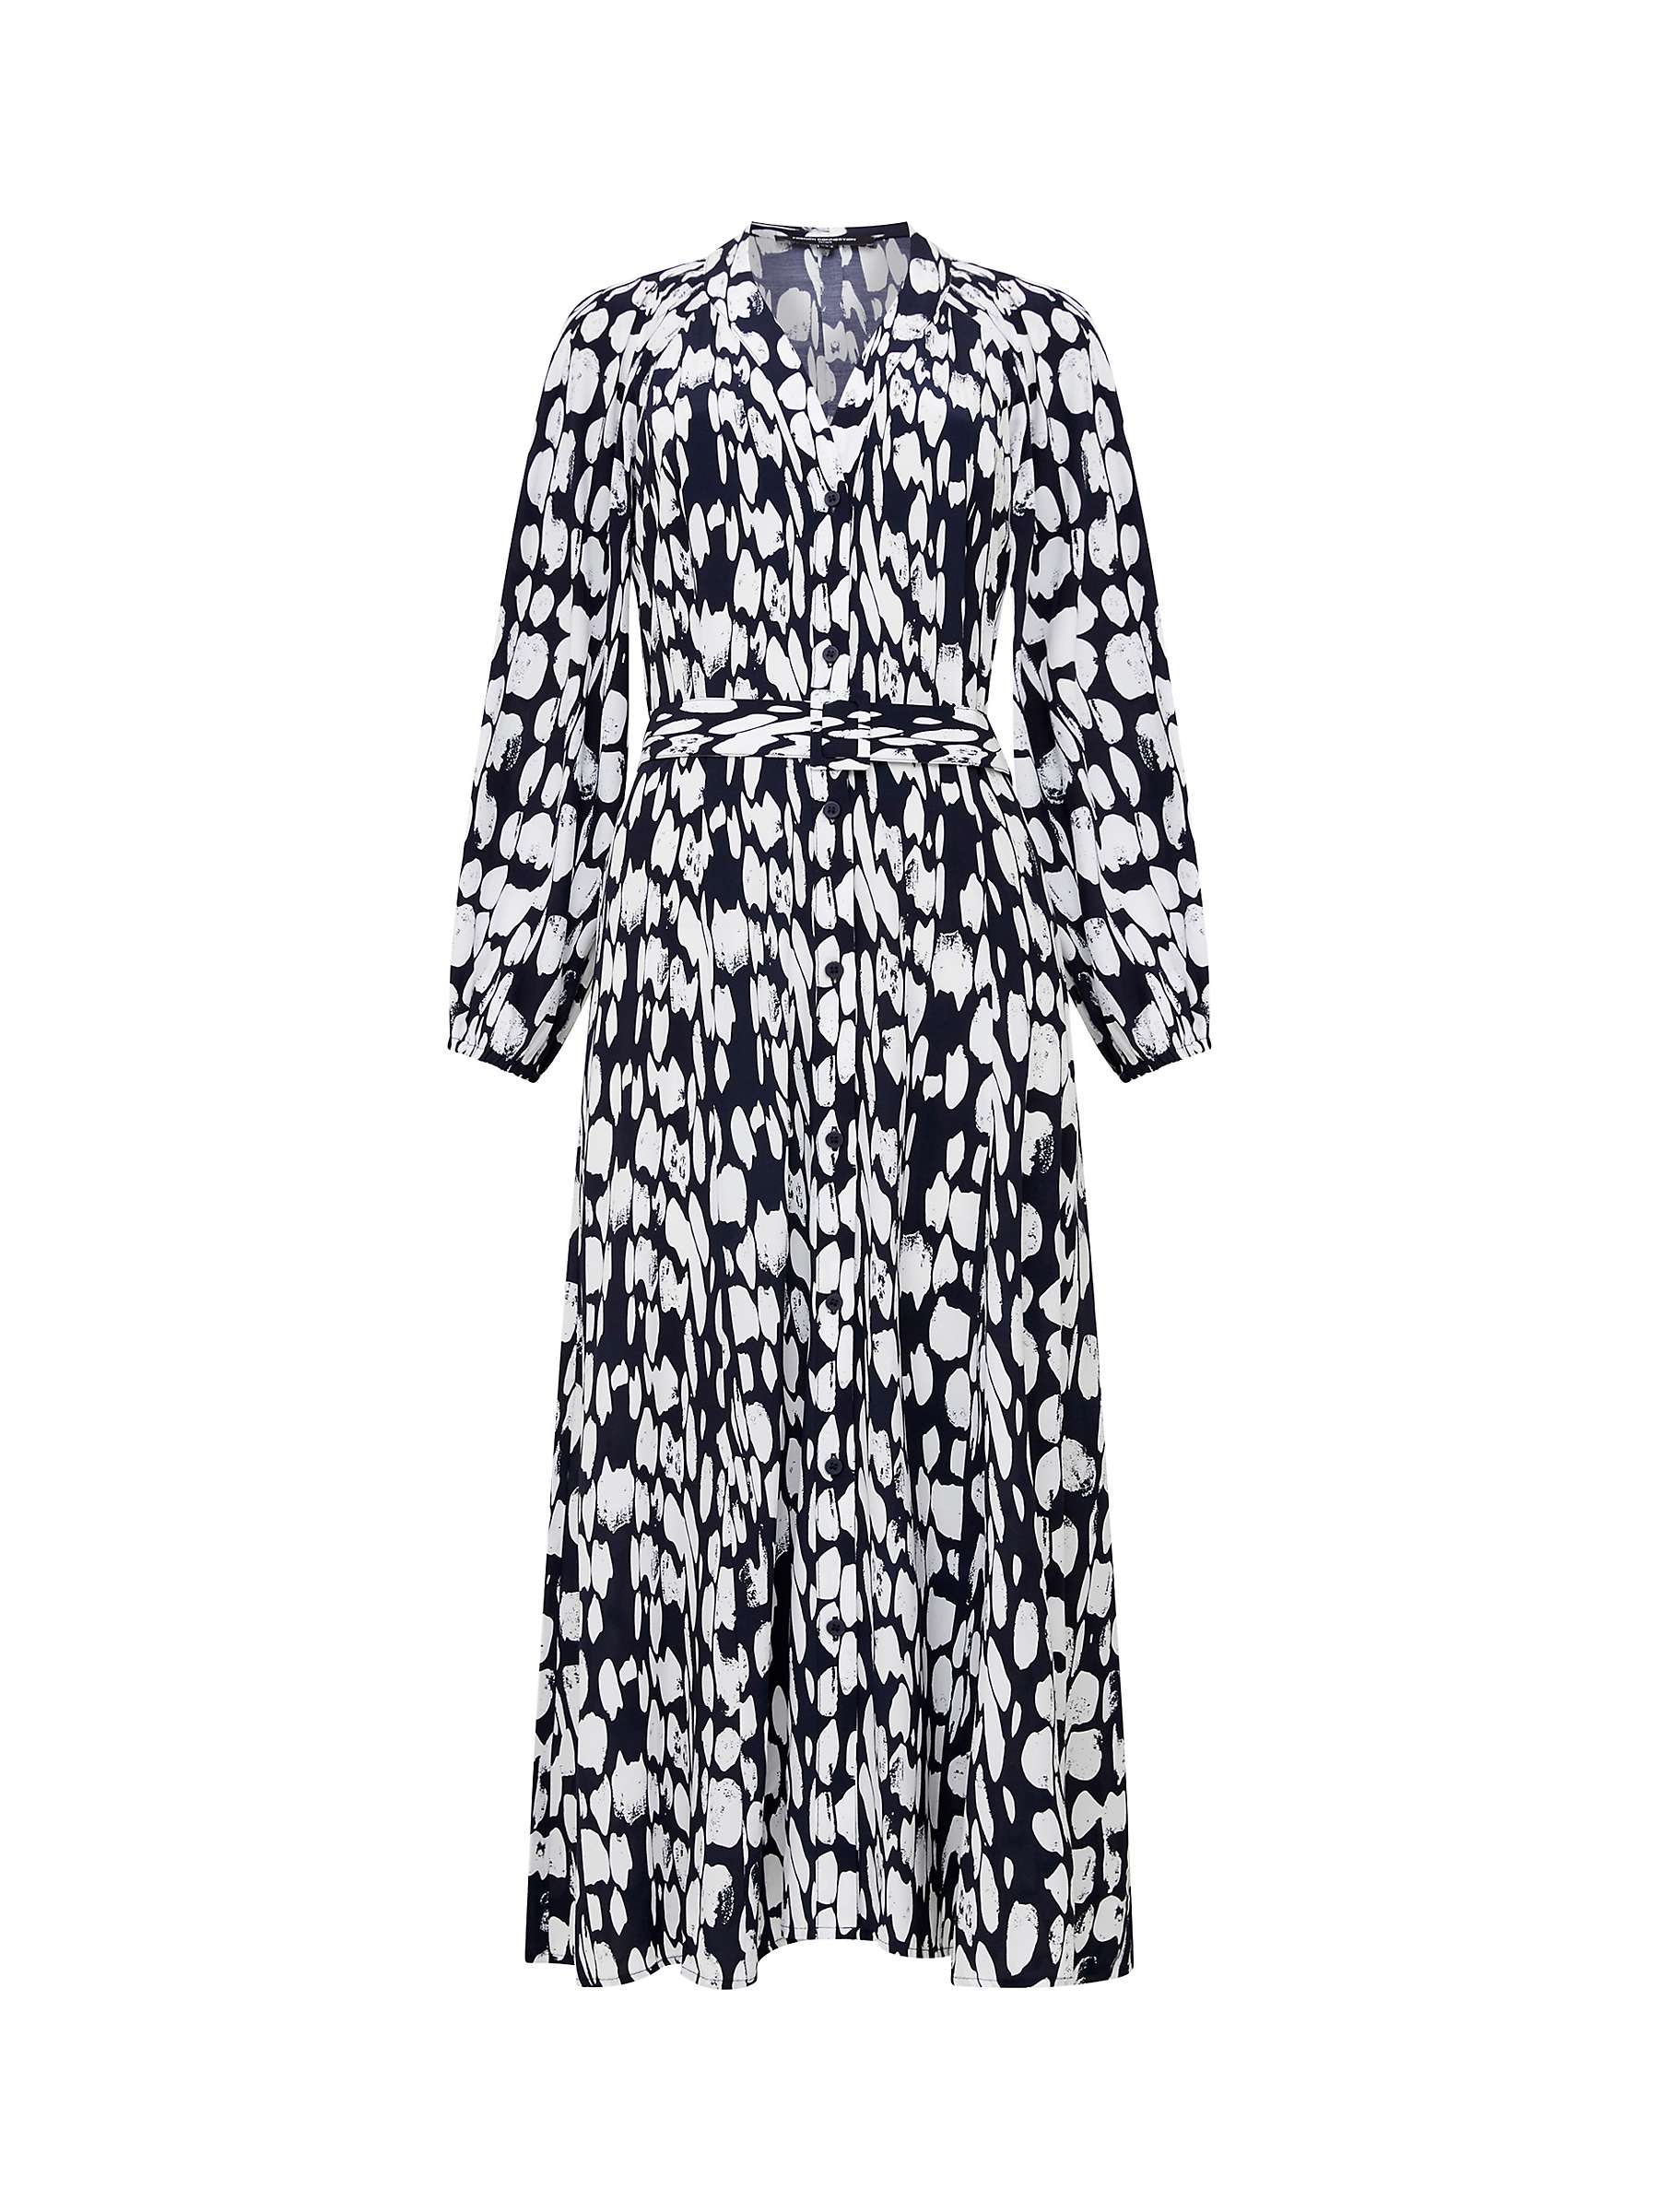 Buy French Connection Islanna Shirt Midi Dress Online at johnlewis.com